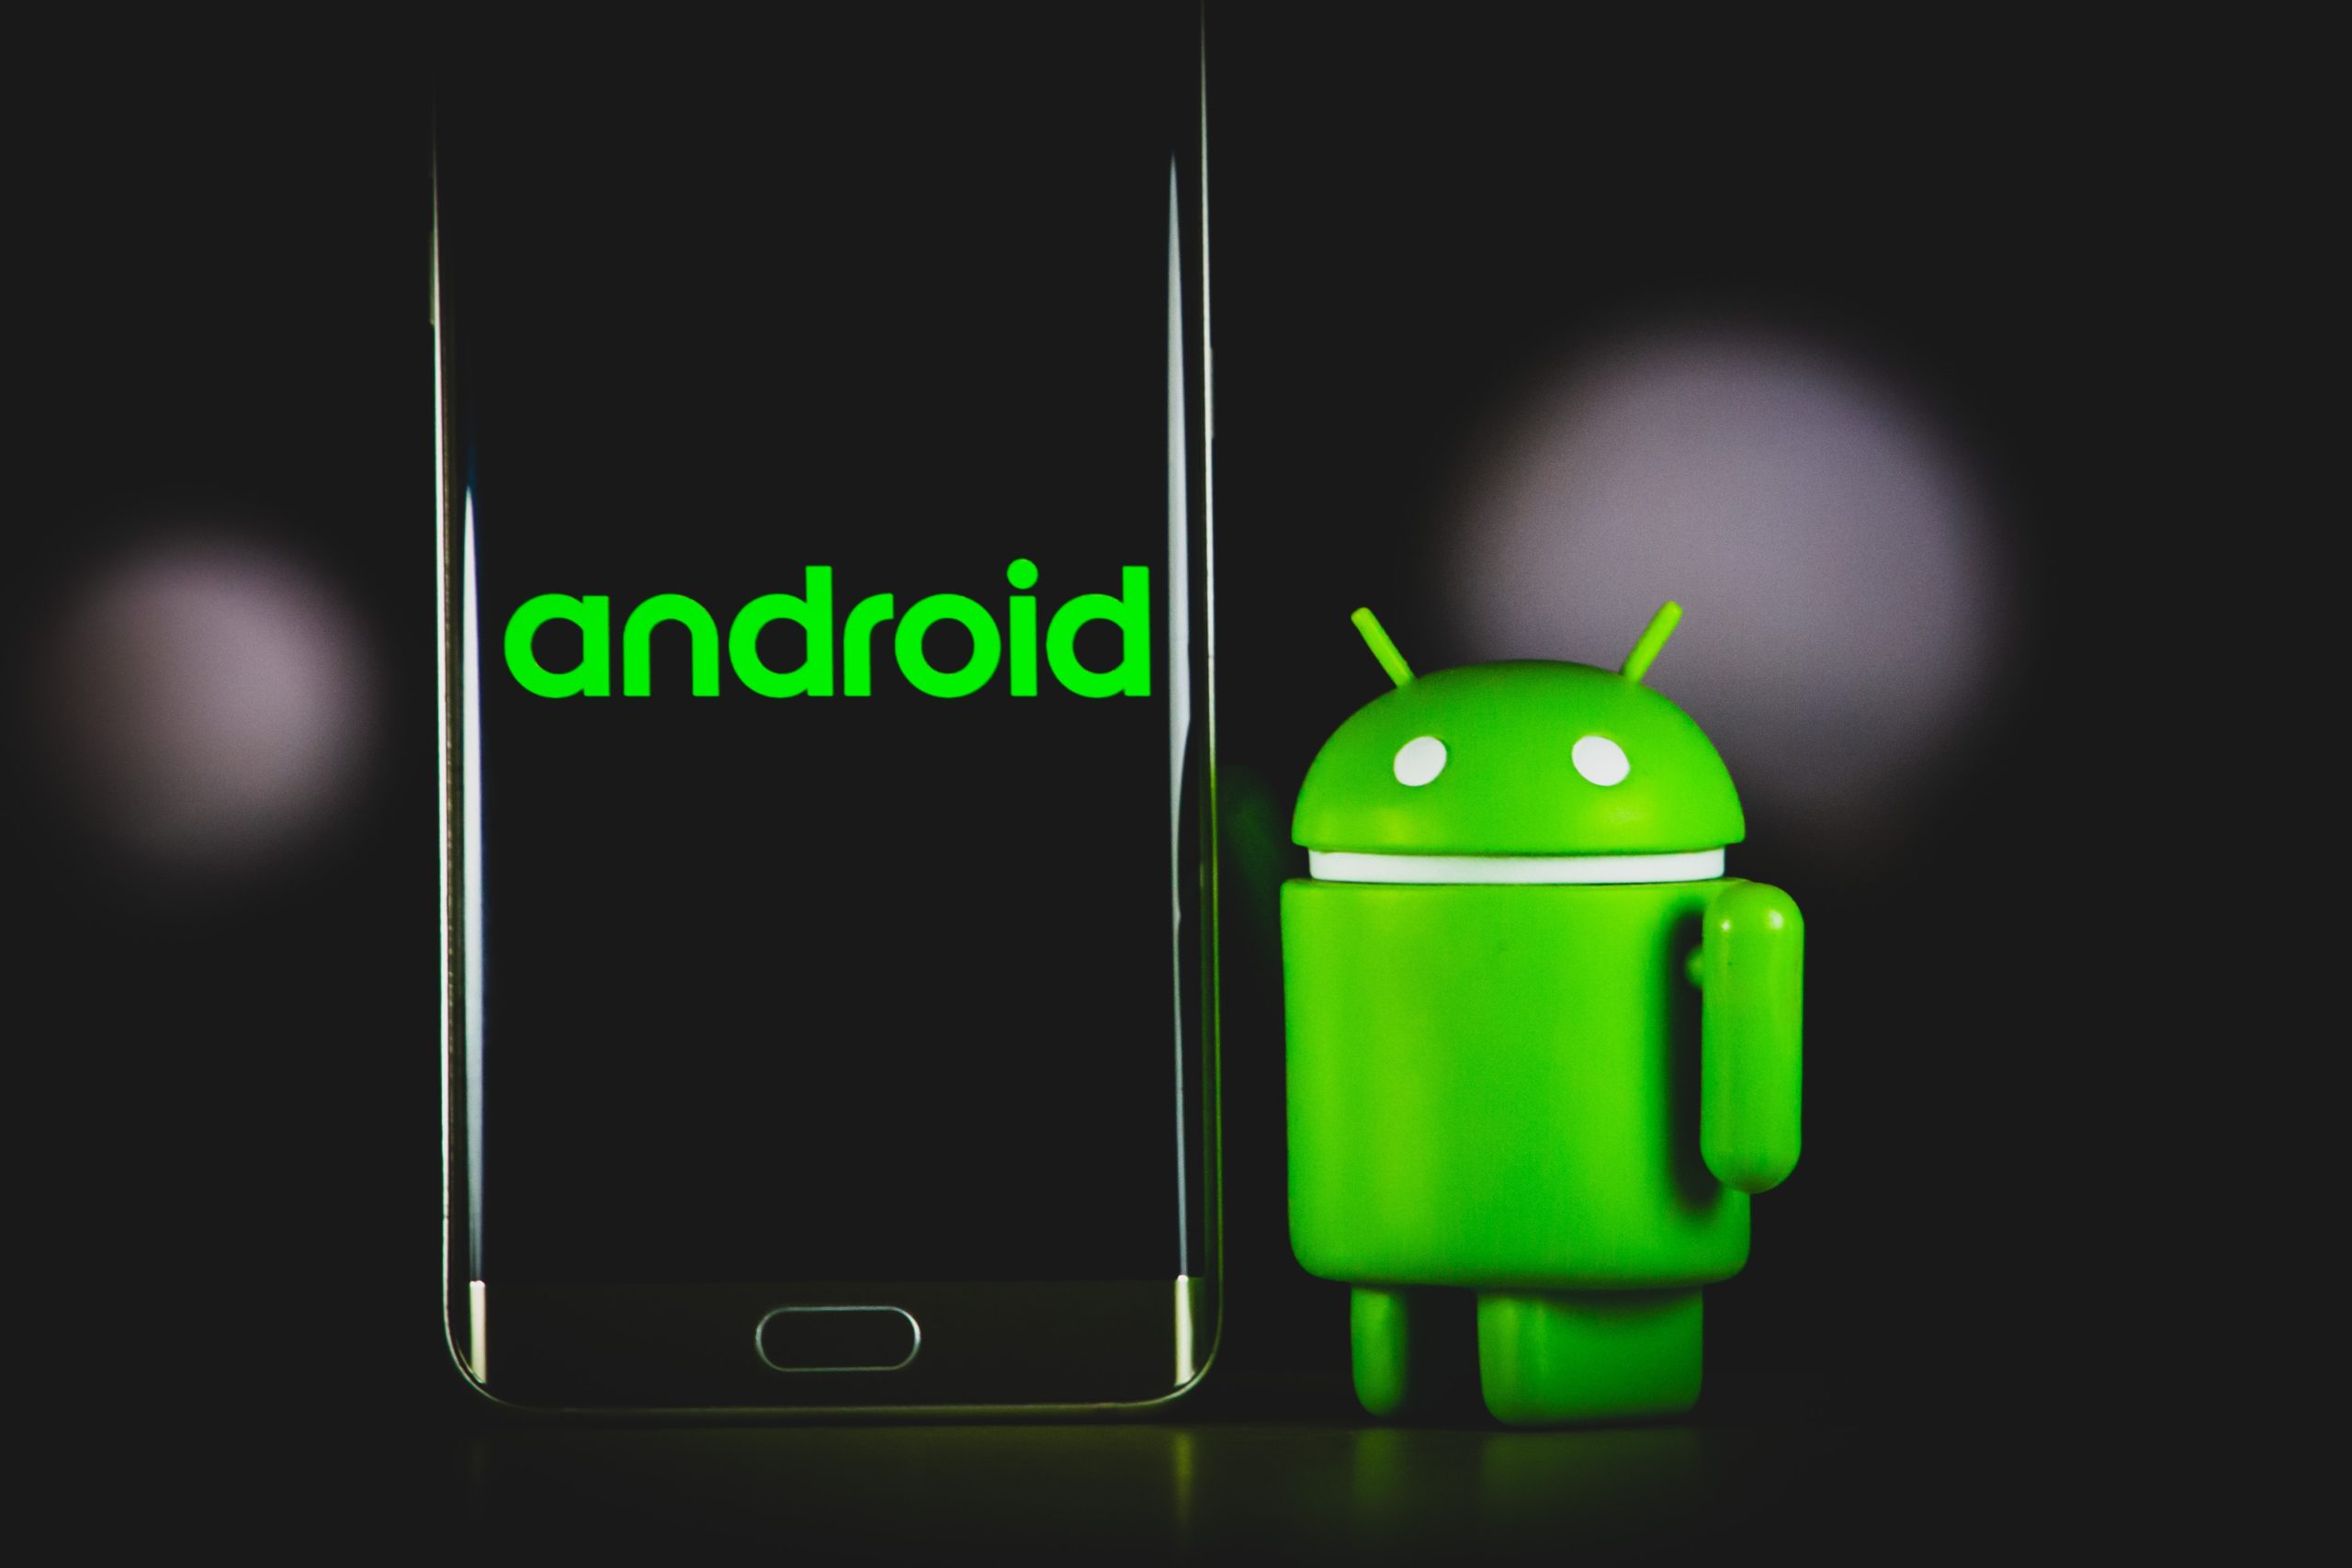 Android App Development Complete Training